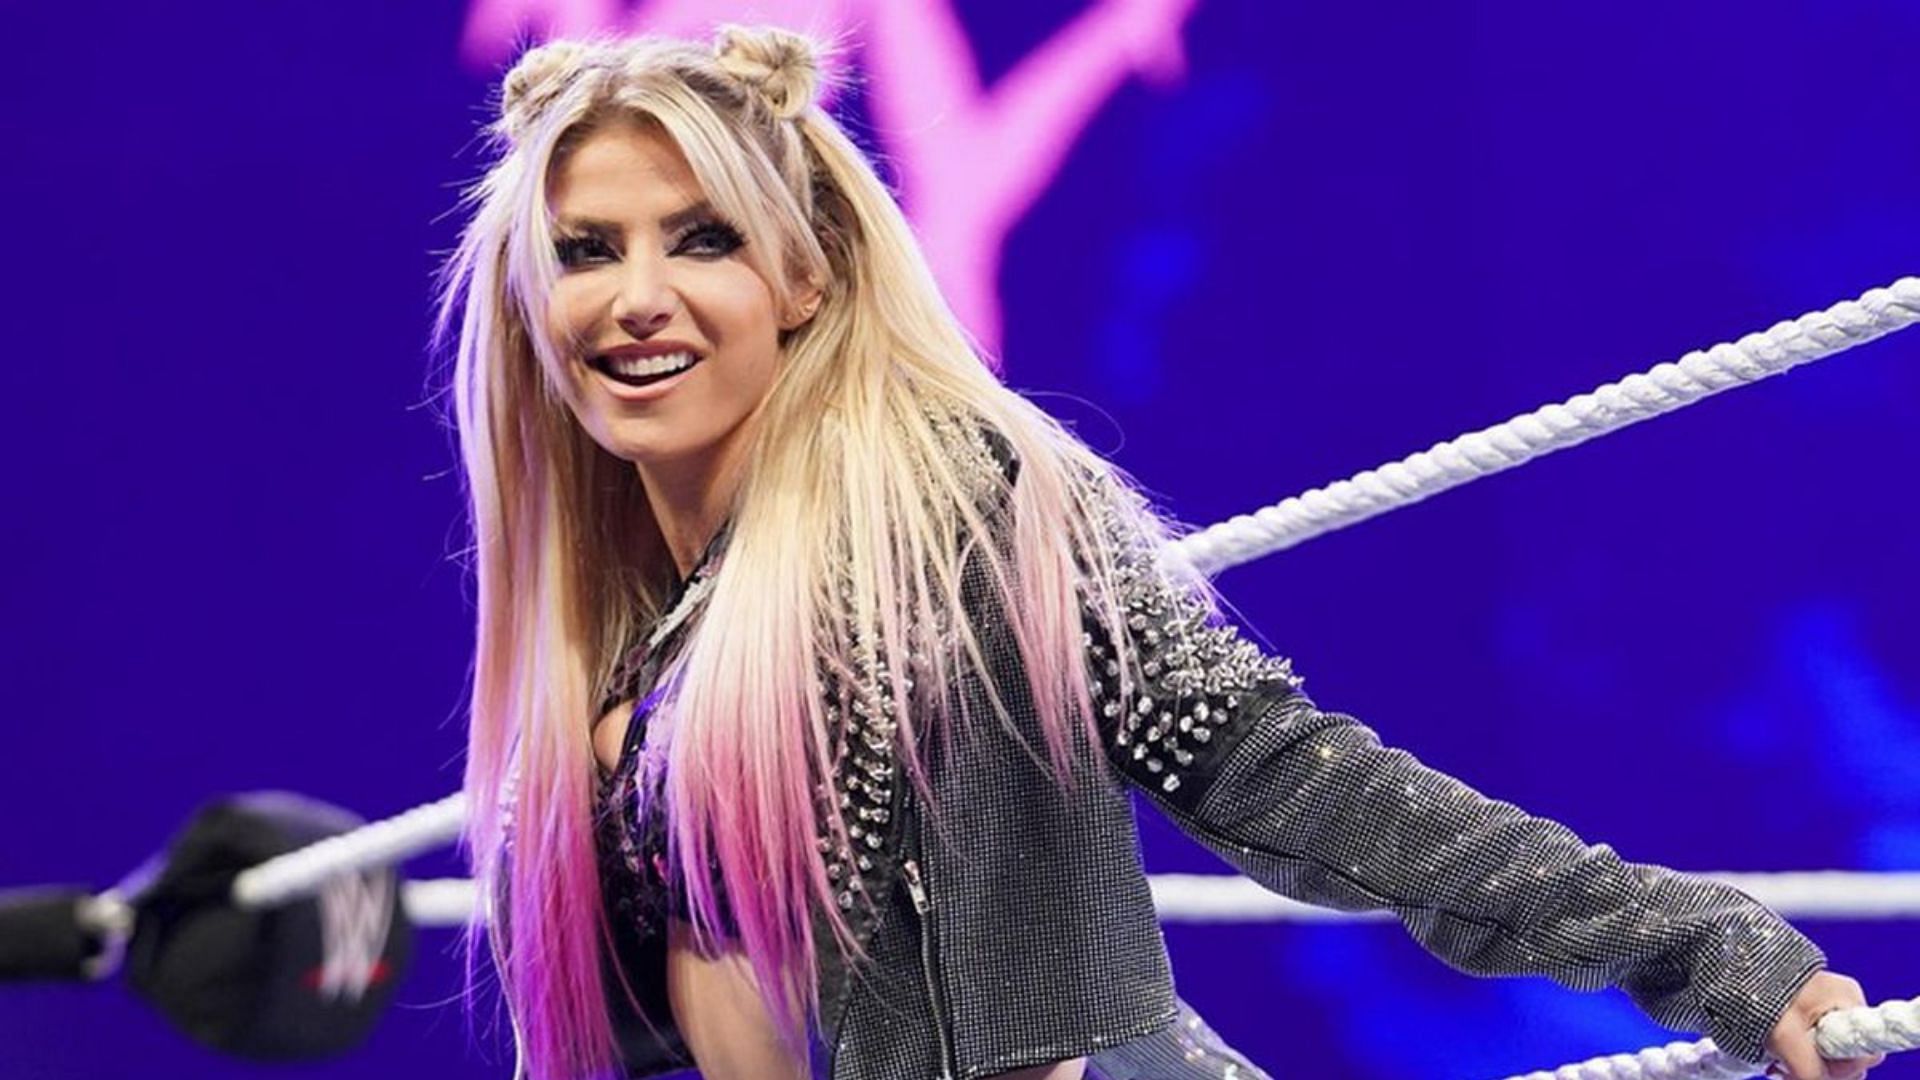 Alexa Bliss lost in the main event of this week